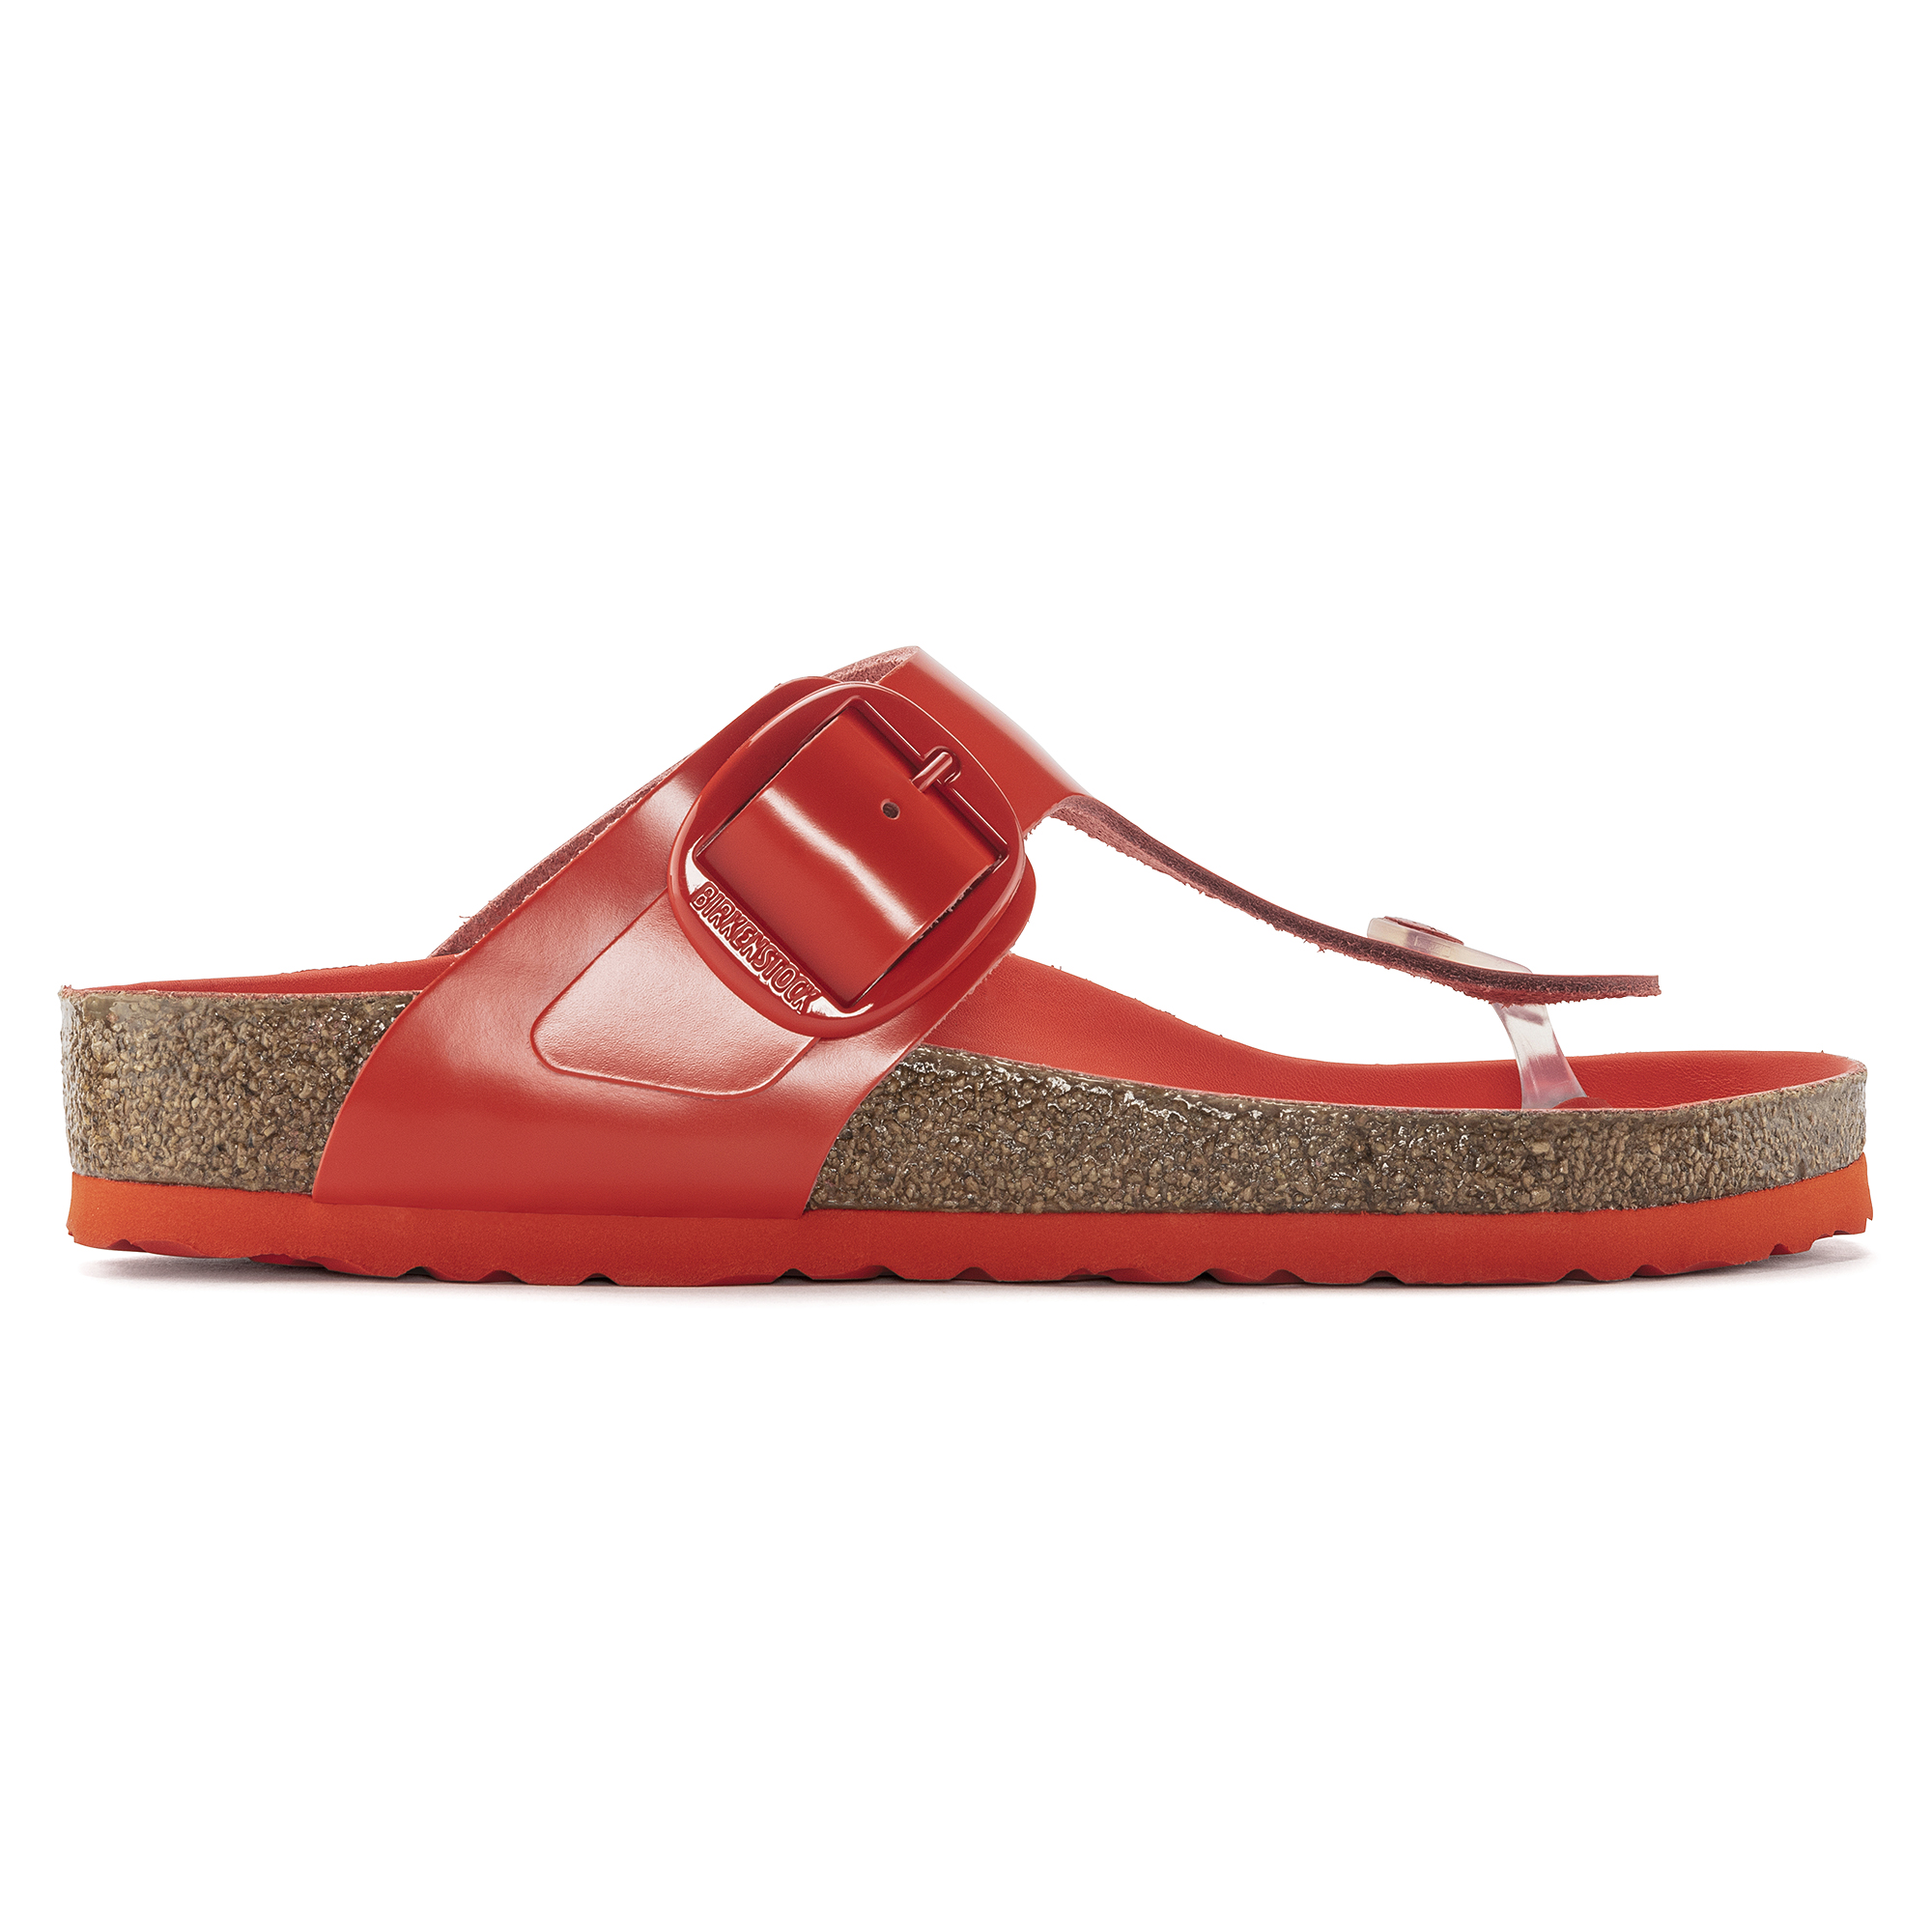 Gizeh Big Buckle Natural Leather Patent High Shine Tomato | BIRKENSTOCK